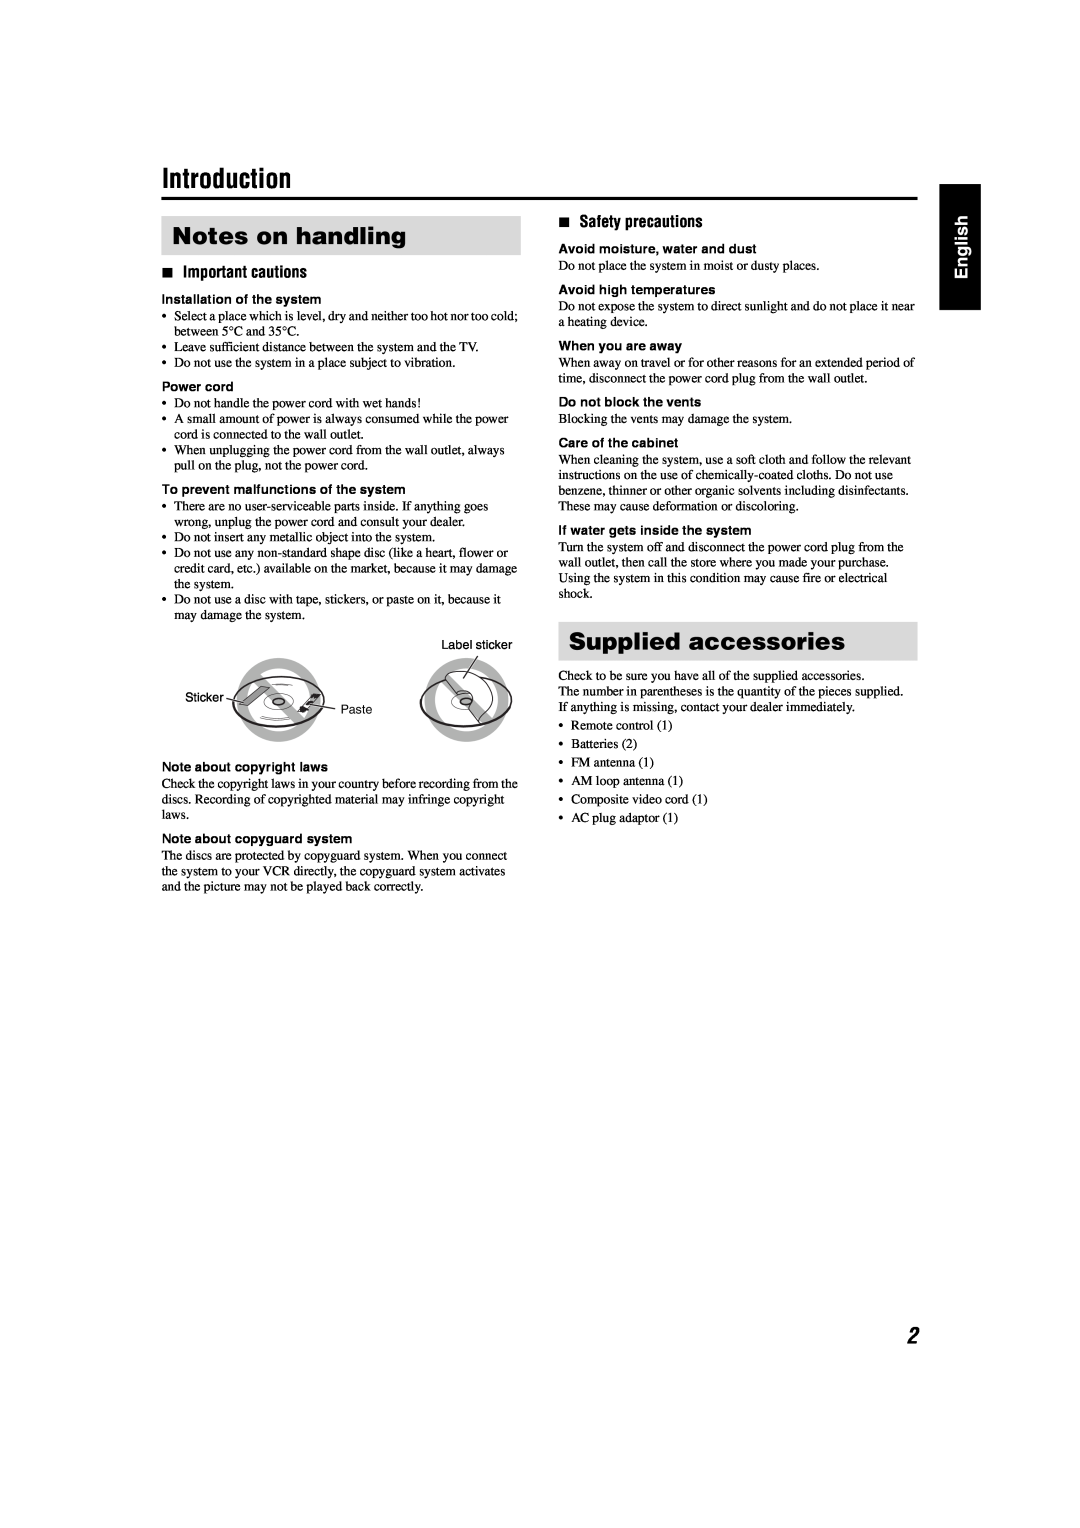 JVC GVT0141-003A manual Introduction, Notes on handling, Supplied accessories, 7Important cautions, 7Safety precautions 